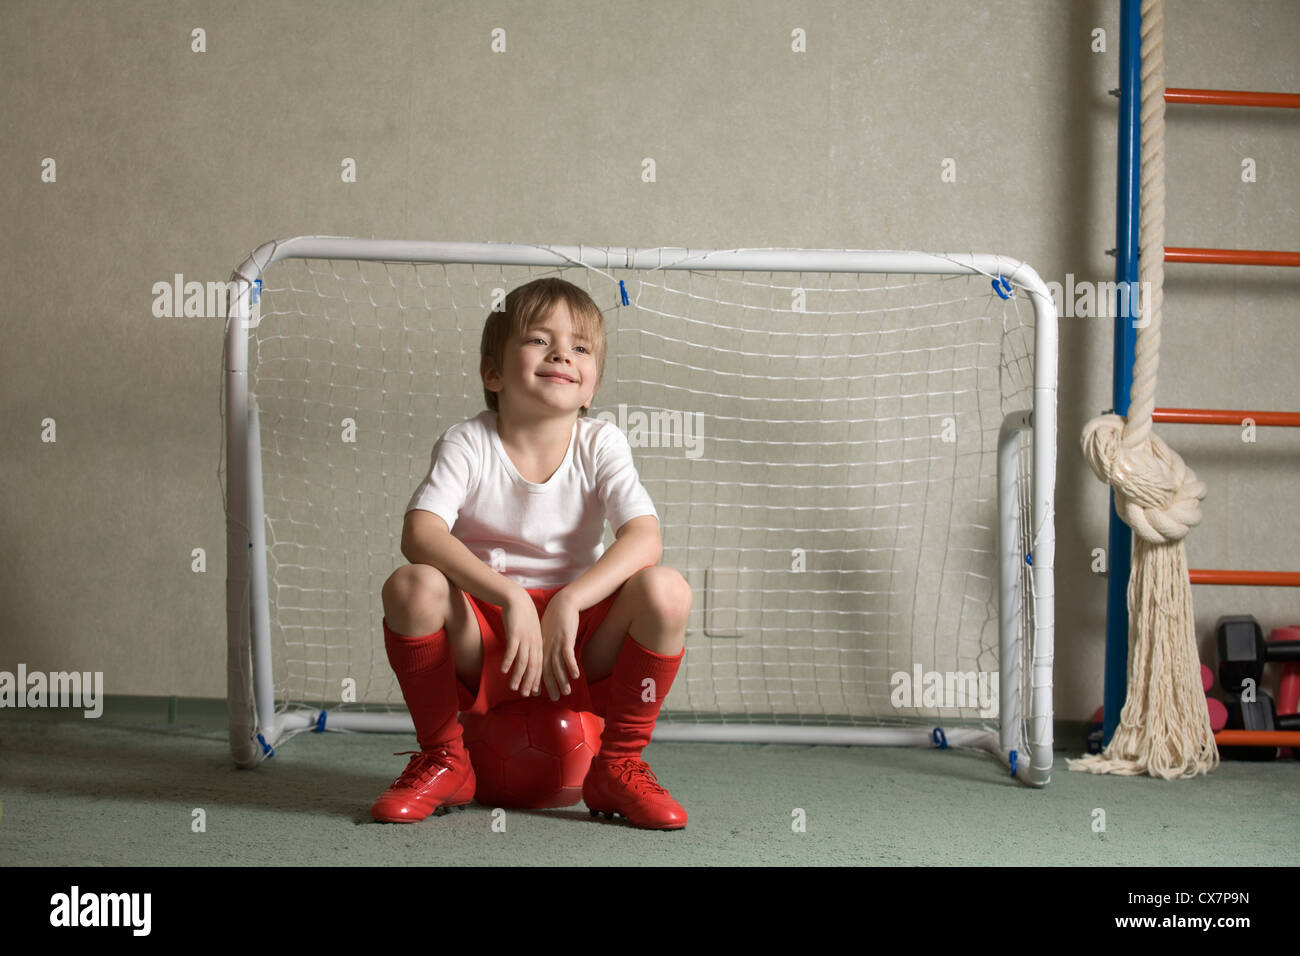 A young boy sitting on a soccer ball in front of a soccer goal Stock Photo